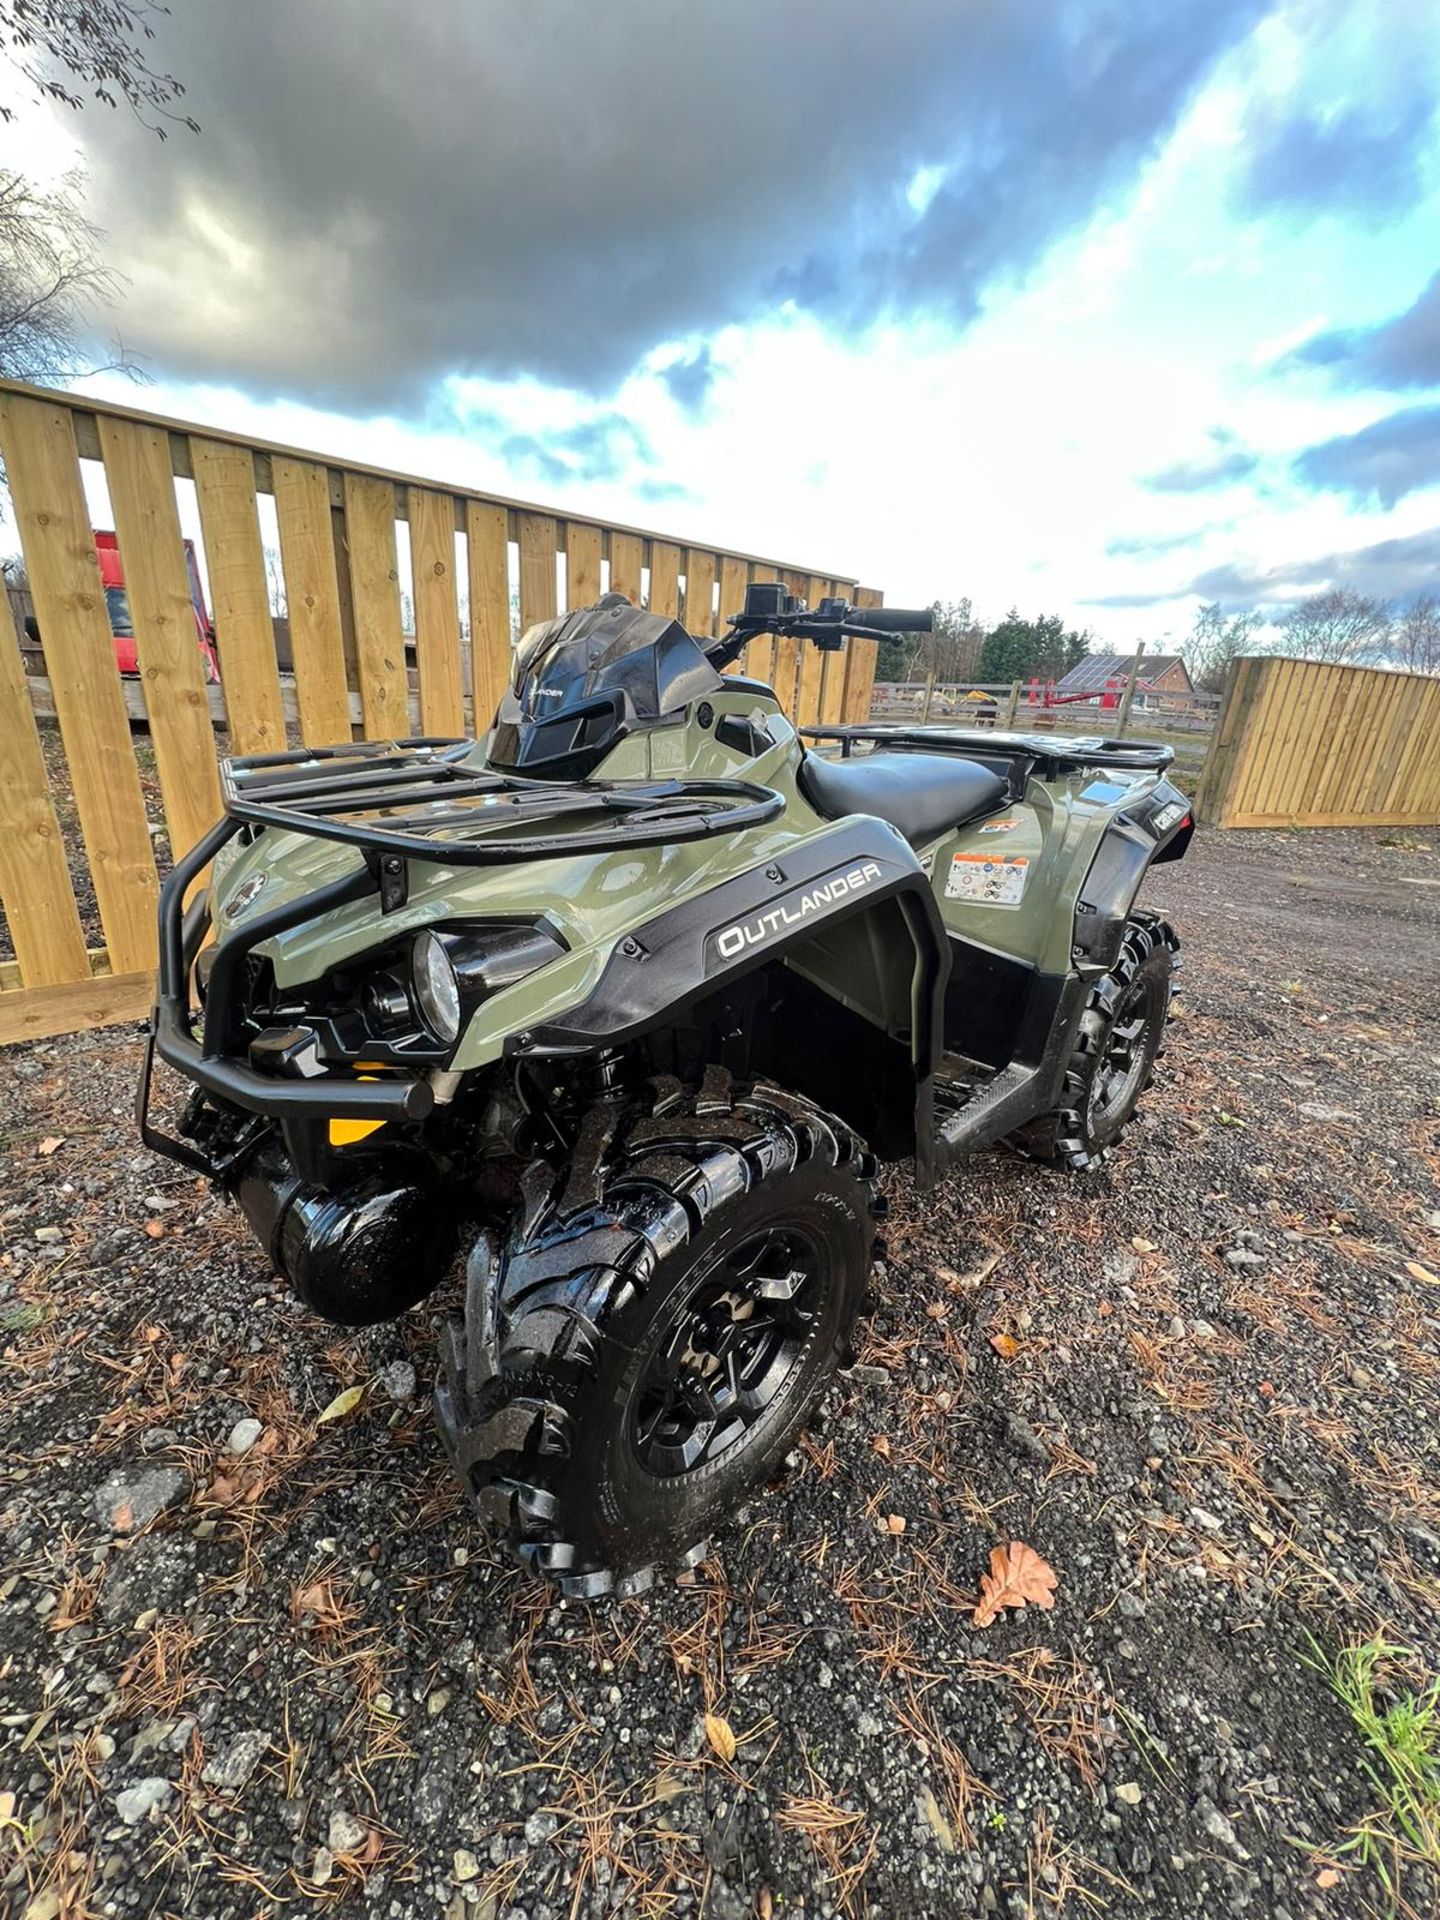 4X4 CAN AM OUTLANDER PRO 570 ROAD LEGAL - Image 13 of 15